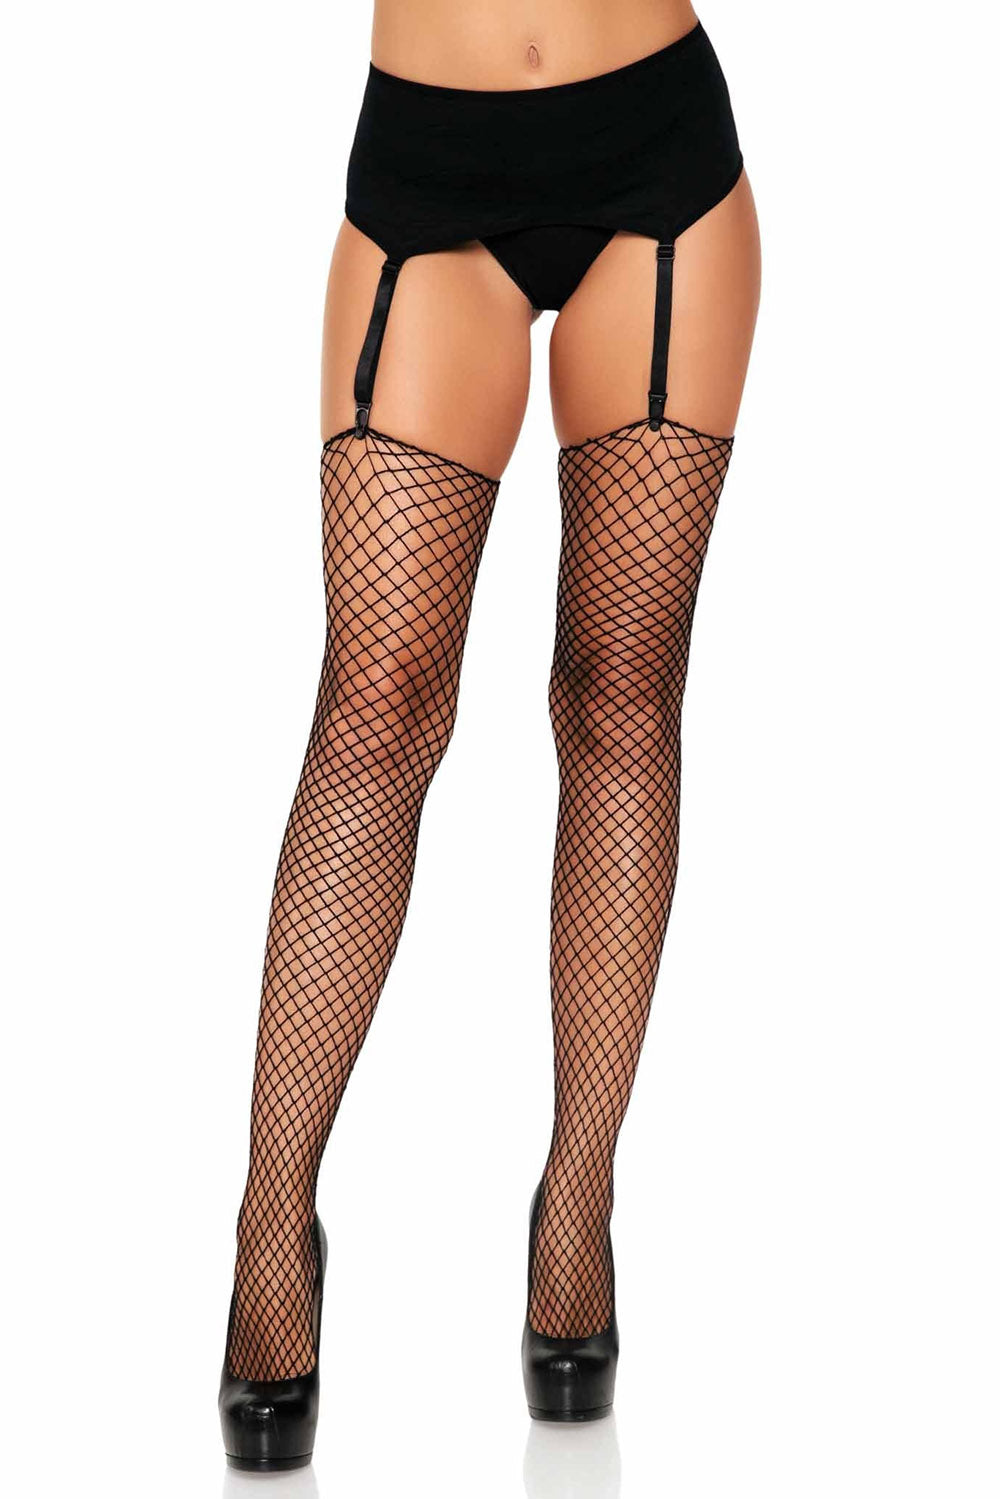 Morticia Unfinished Fishnet Stockings